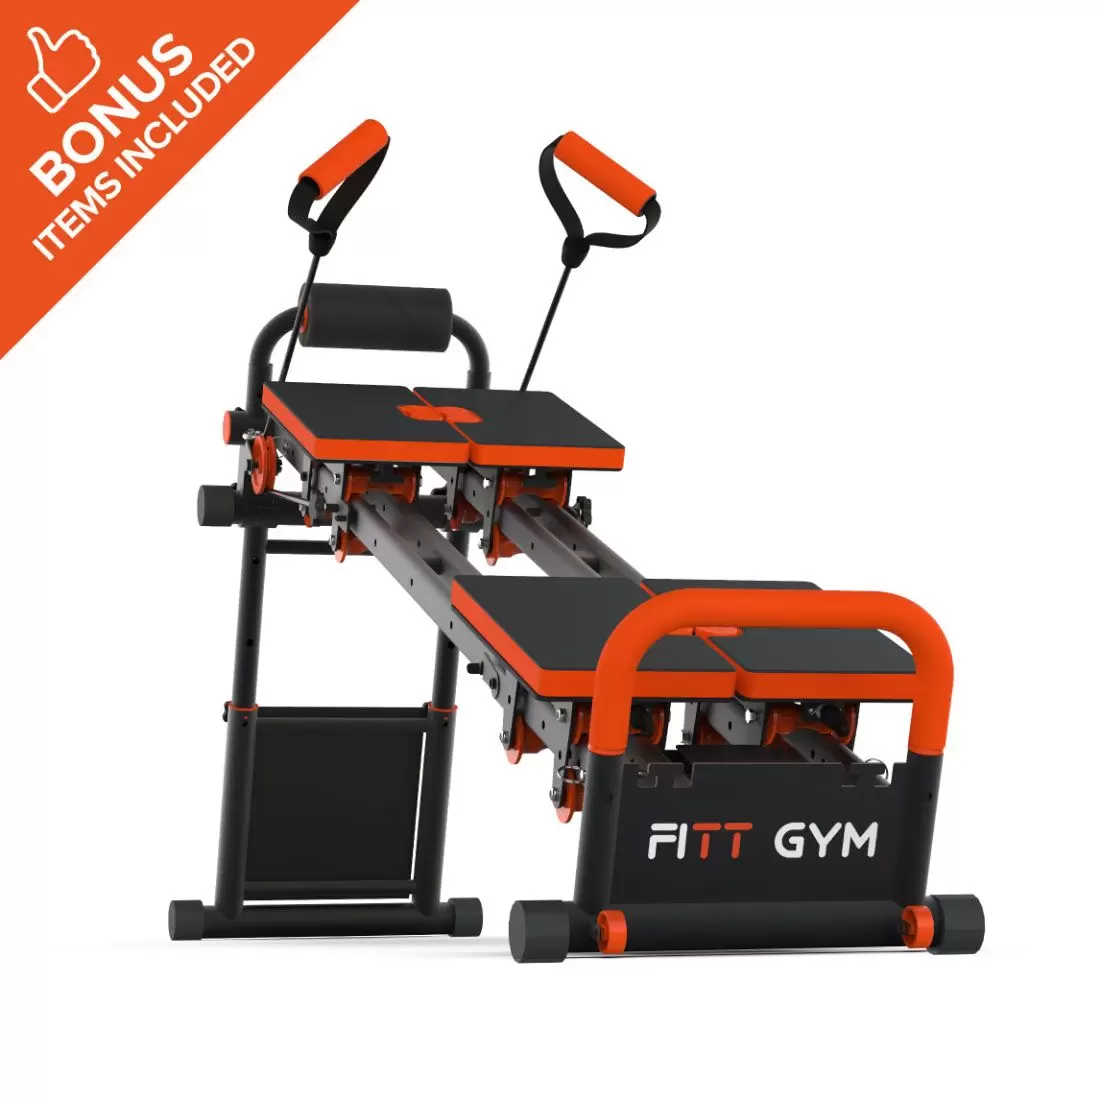 FITT Gym by New Image